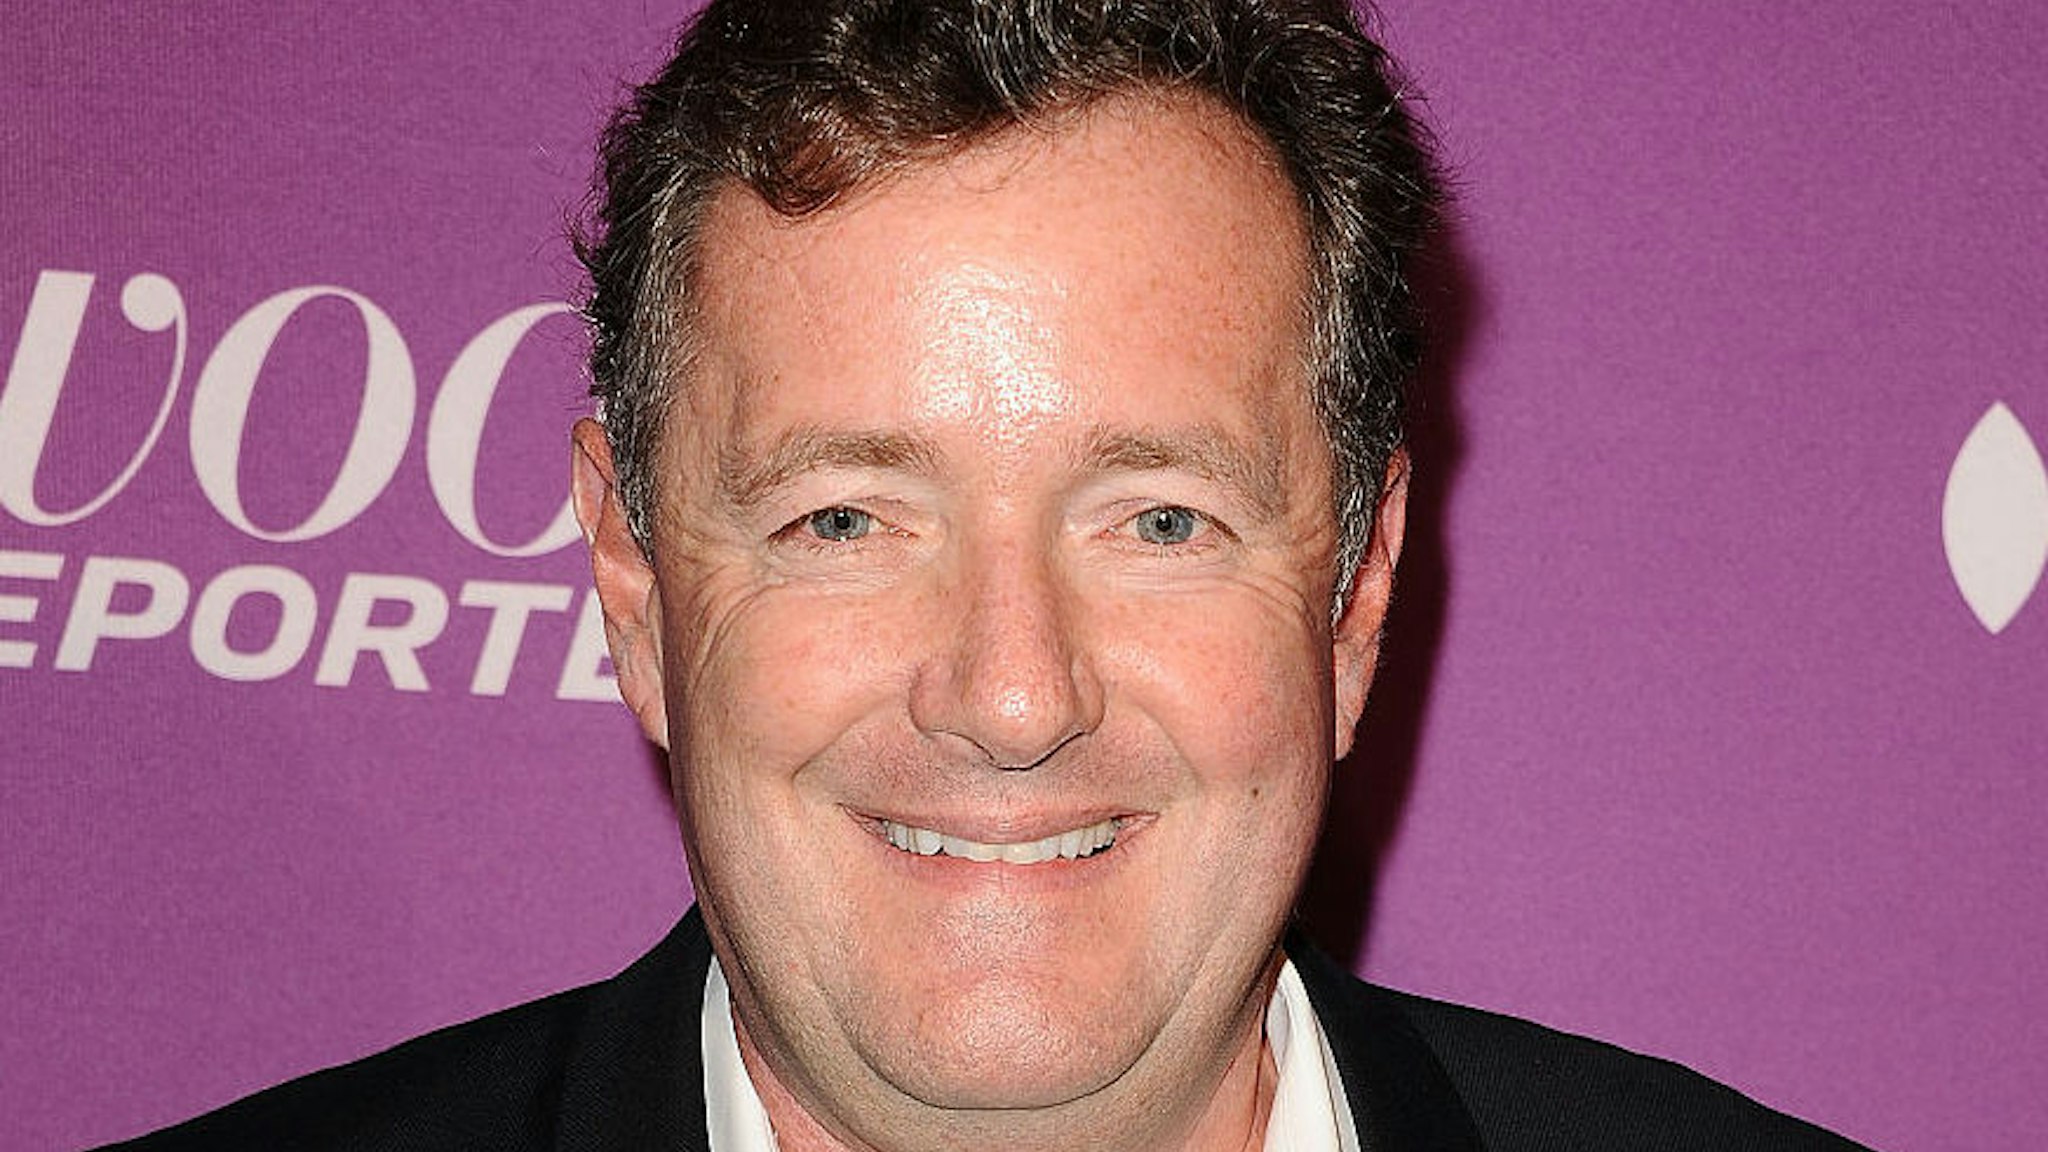 Piers Morgan attends the Hollywood Reporter's 3rd annual Academy Awards nominees night at Spago on February 2, 2015 in Beverly Hills, California.